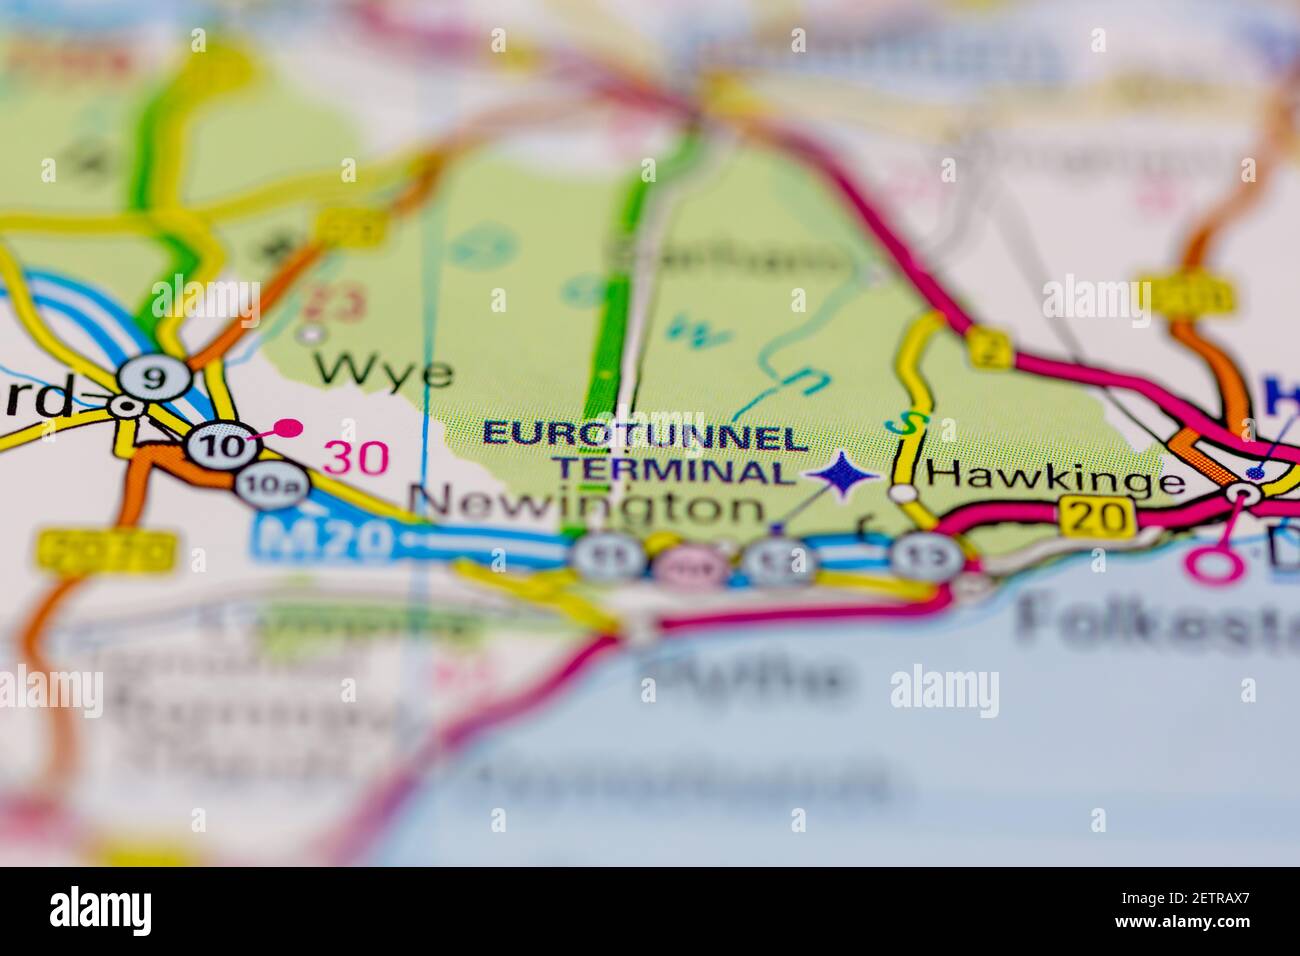 Eurotunnel terminal Shown on a road map or Geography map and atlas Stock Photo